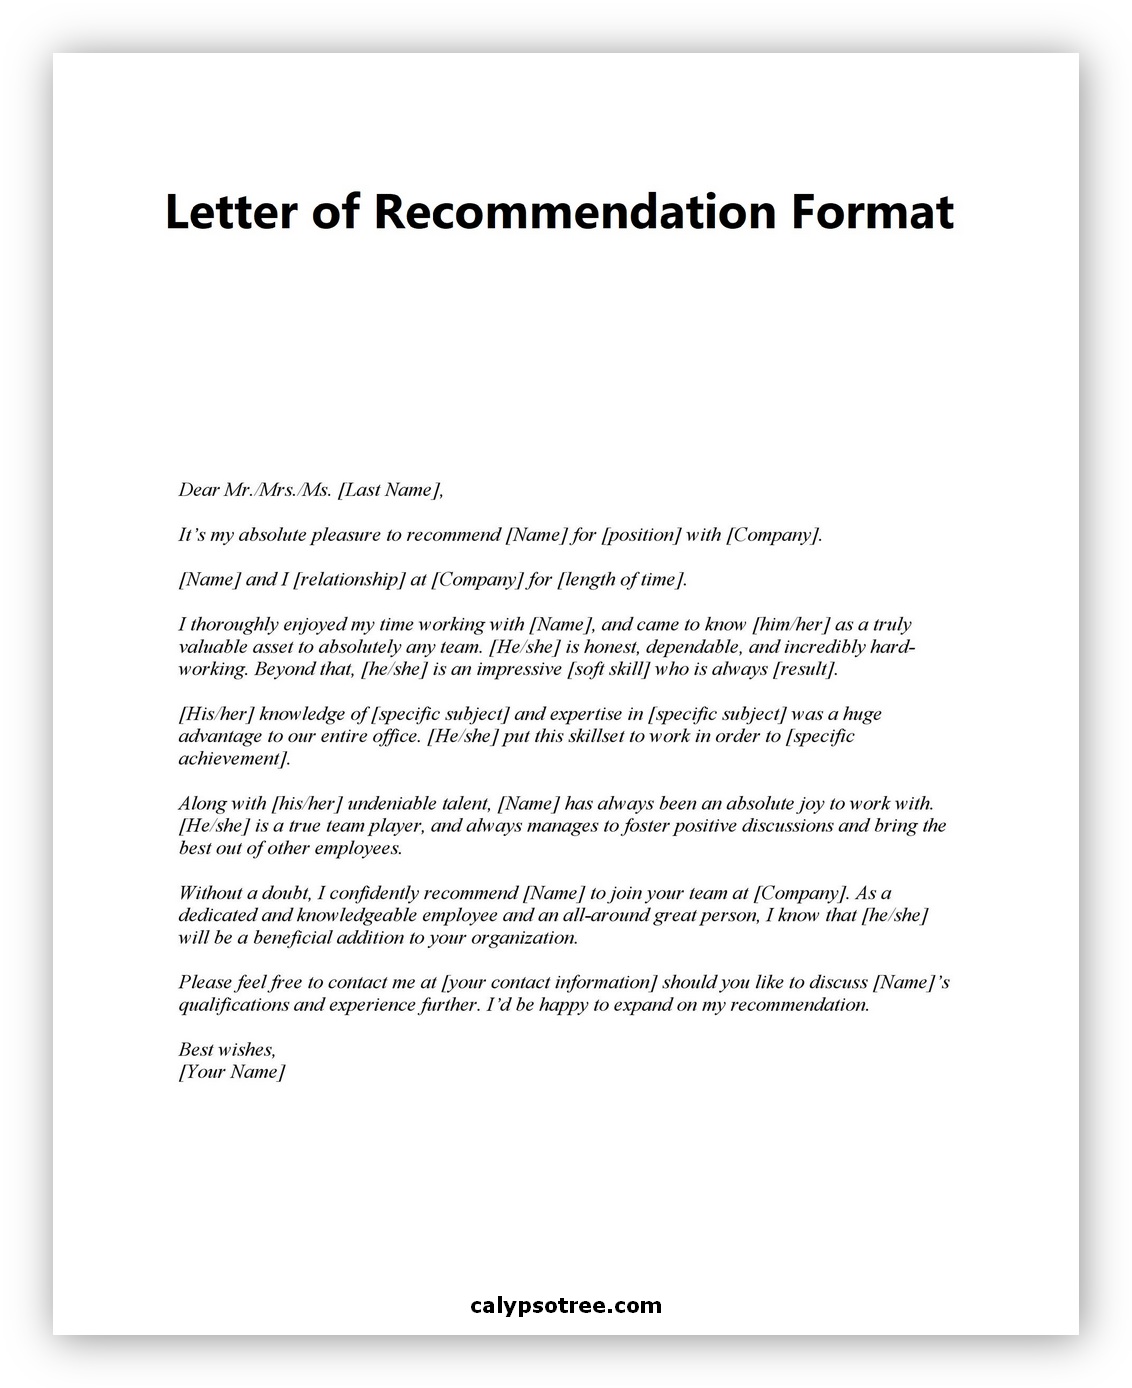 Letter of Recommendation Format 01